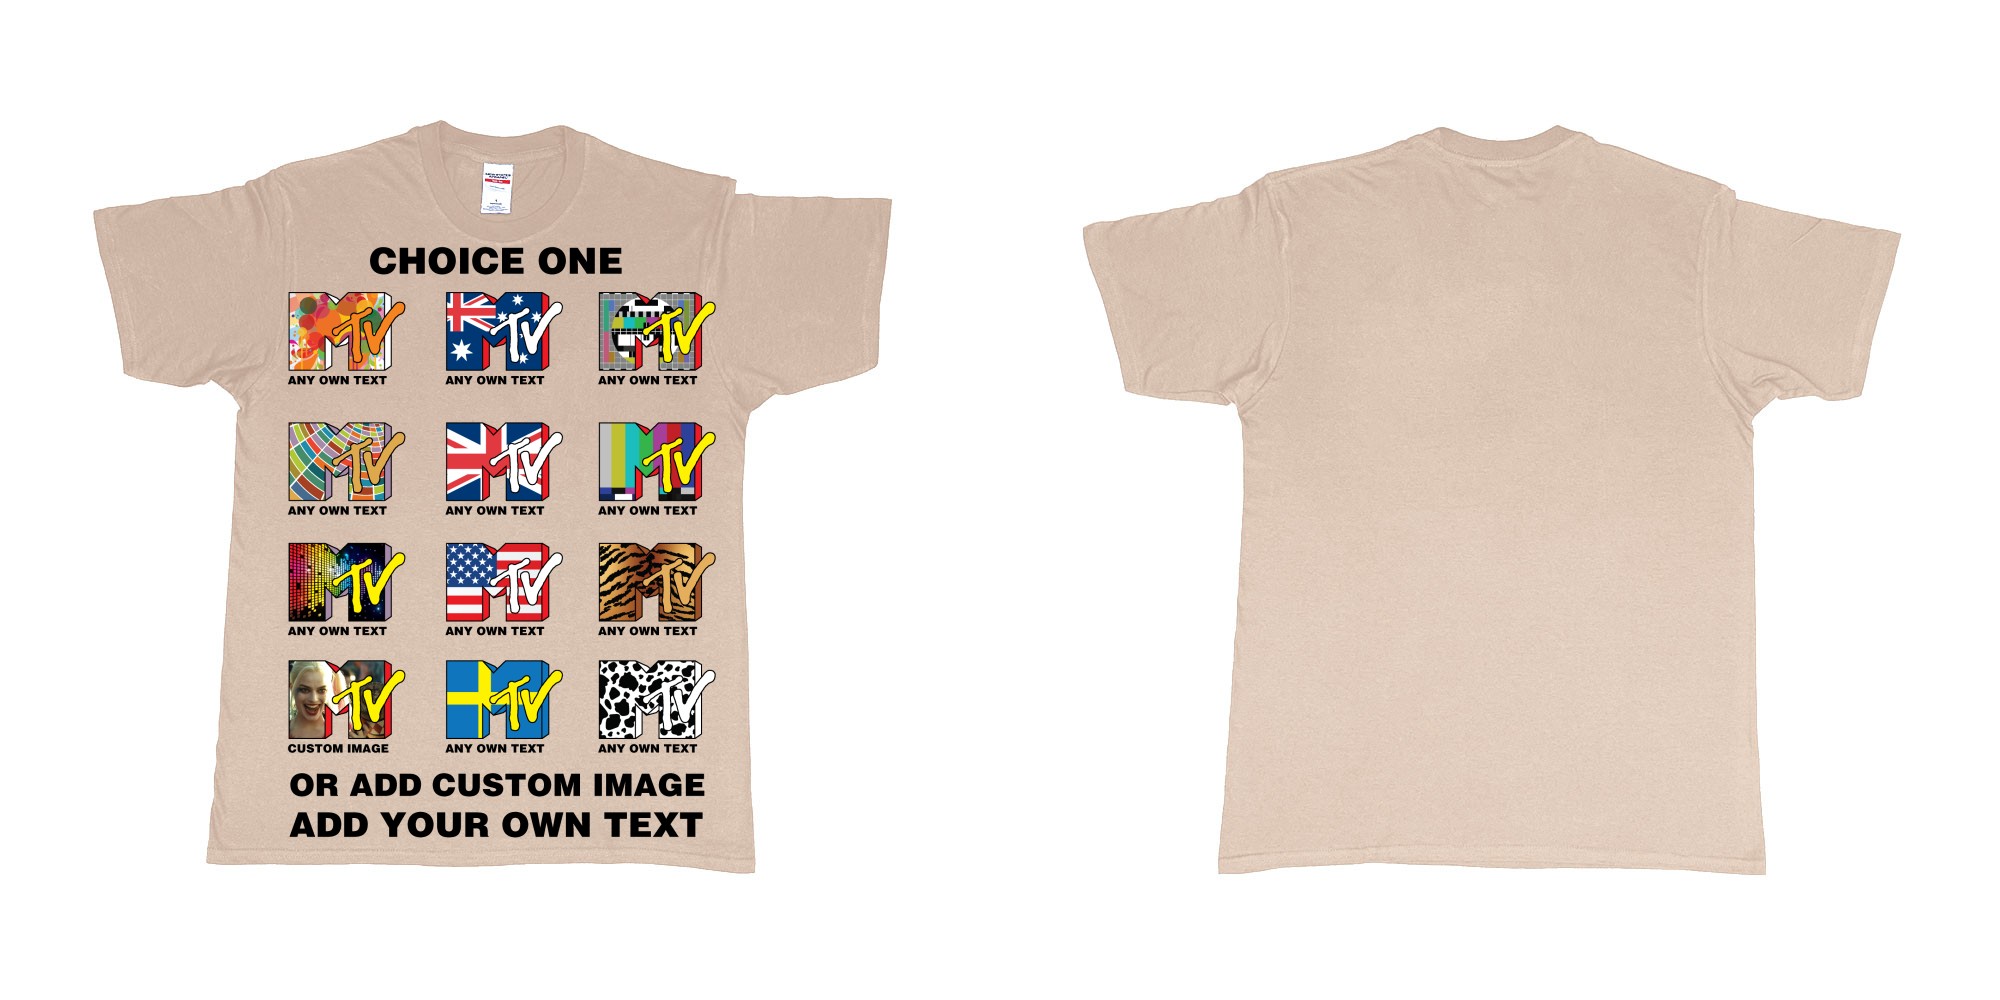 Custom tshirt design mtv logo choice any background text print in fabric color sand choice your own text made in Bali by The Pirate Way